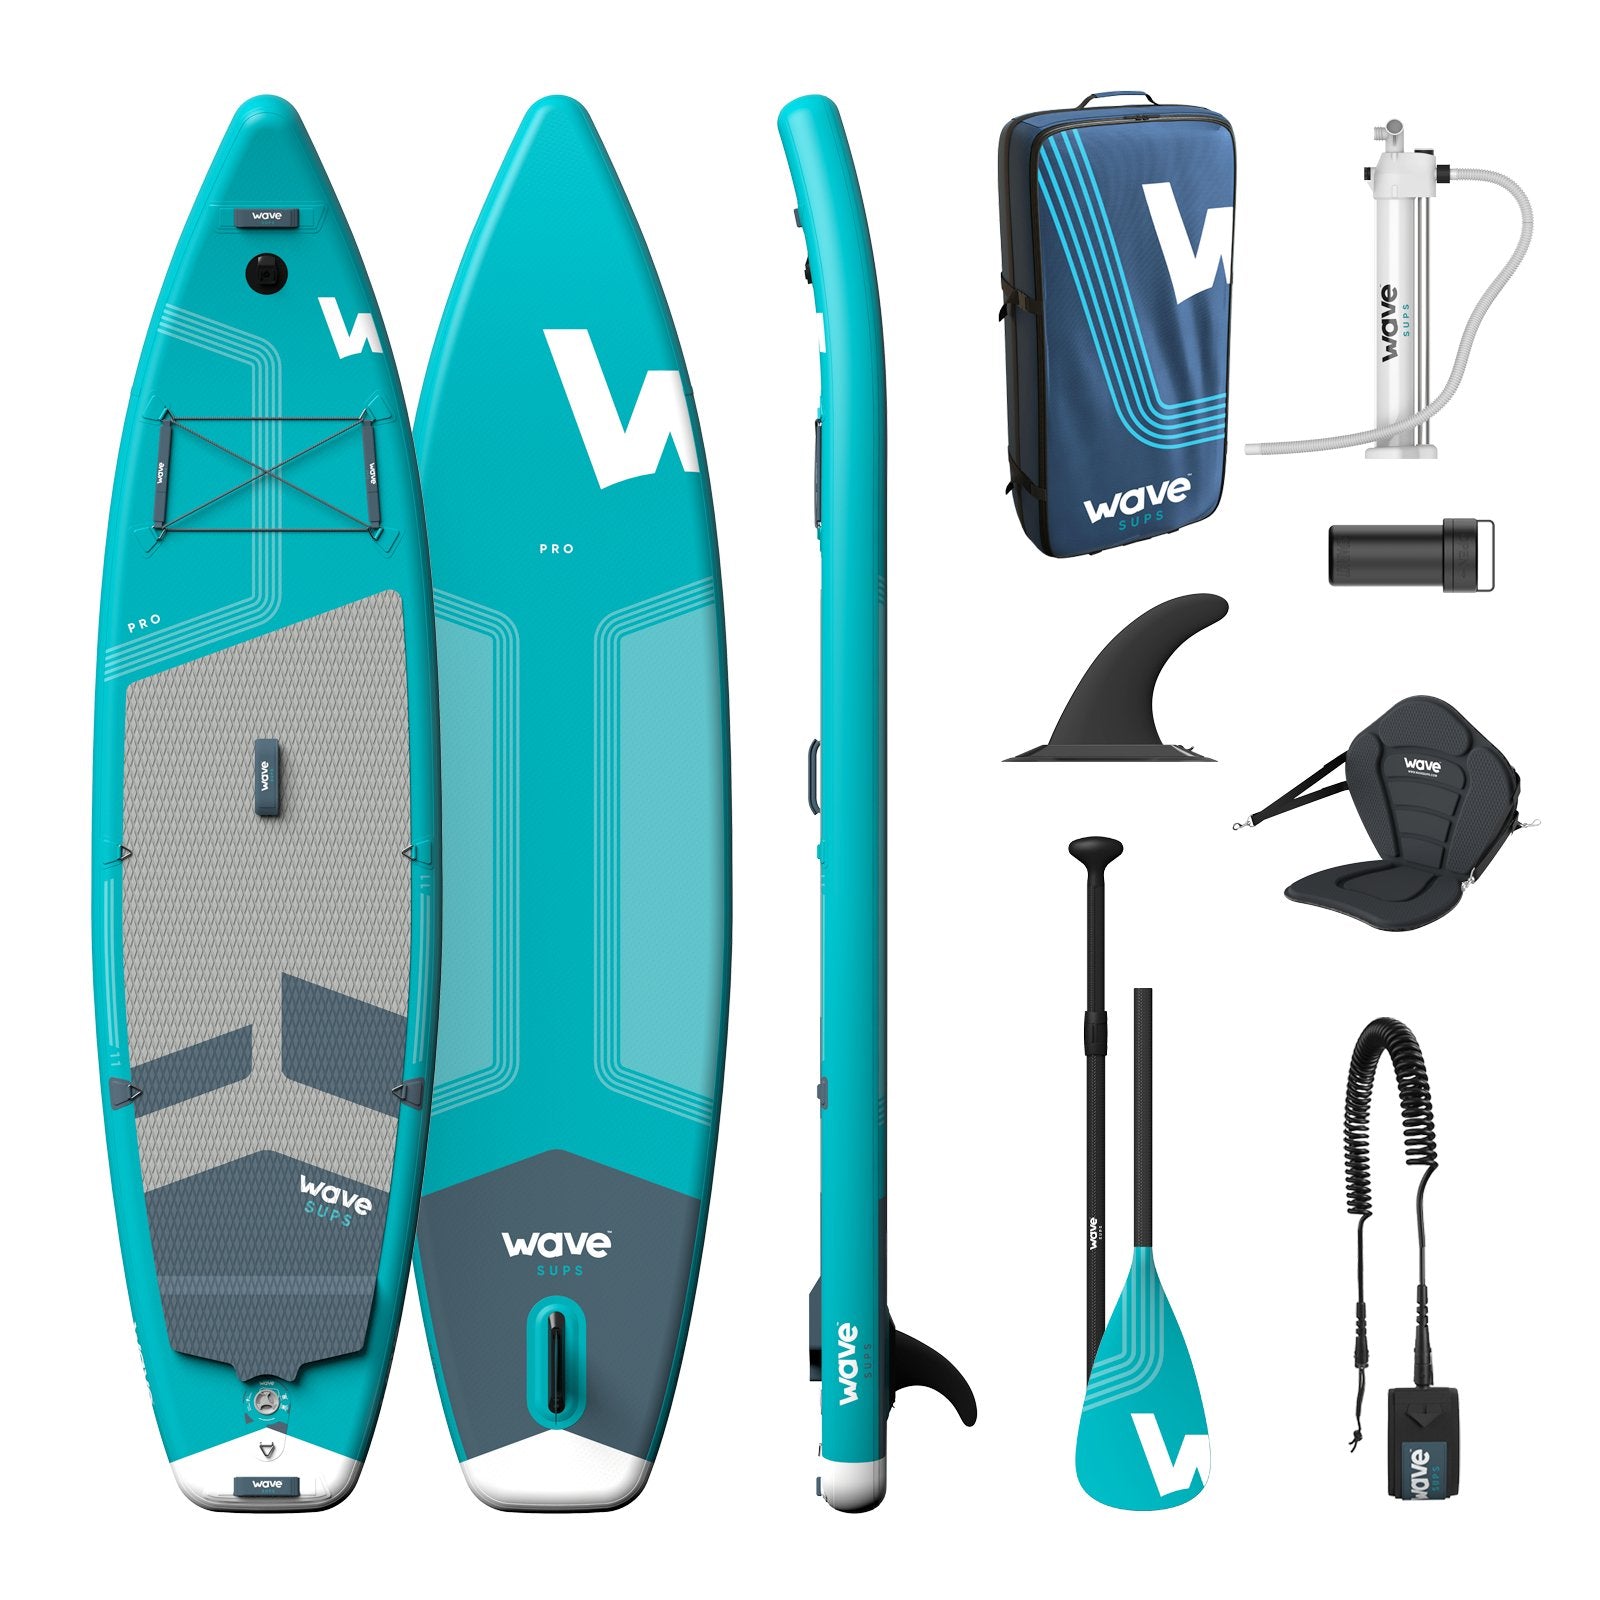 FANATIC Inflatable SUP board Fly Air - Price, Reviews - EASY SURF Shop